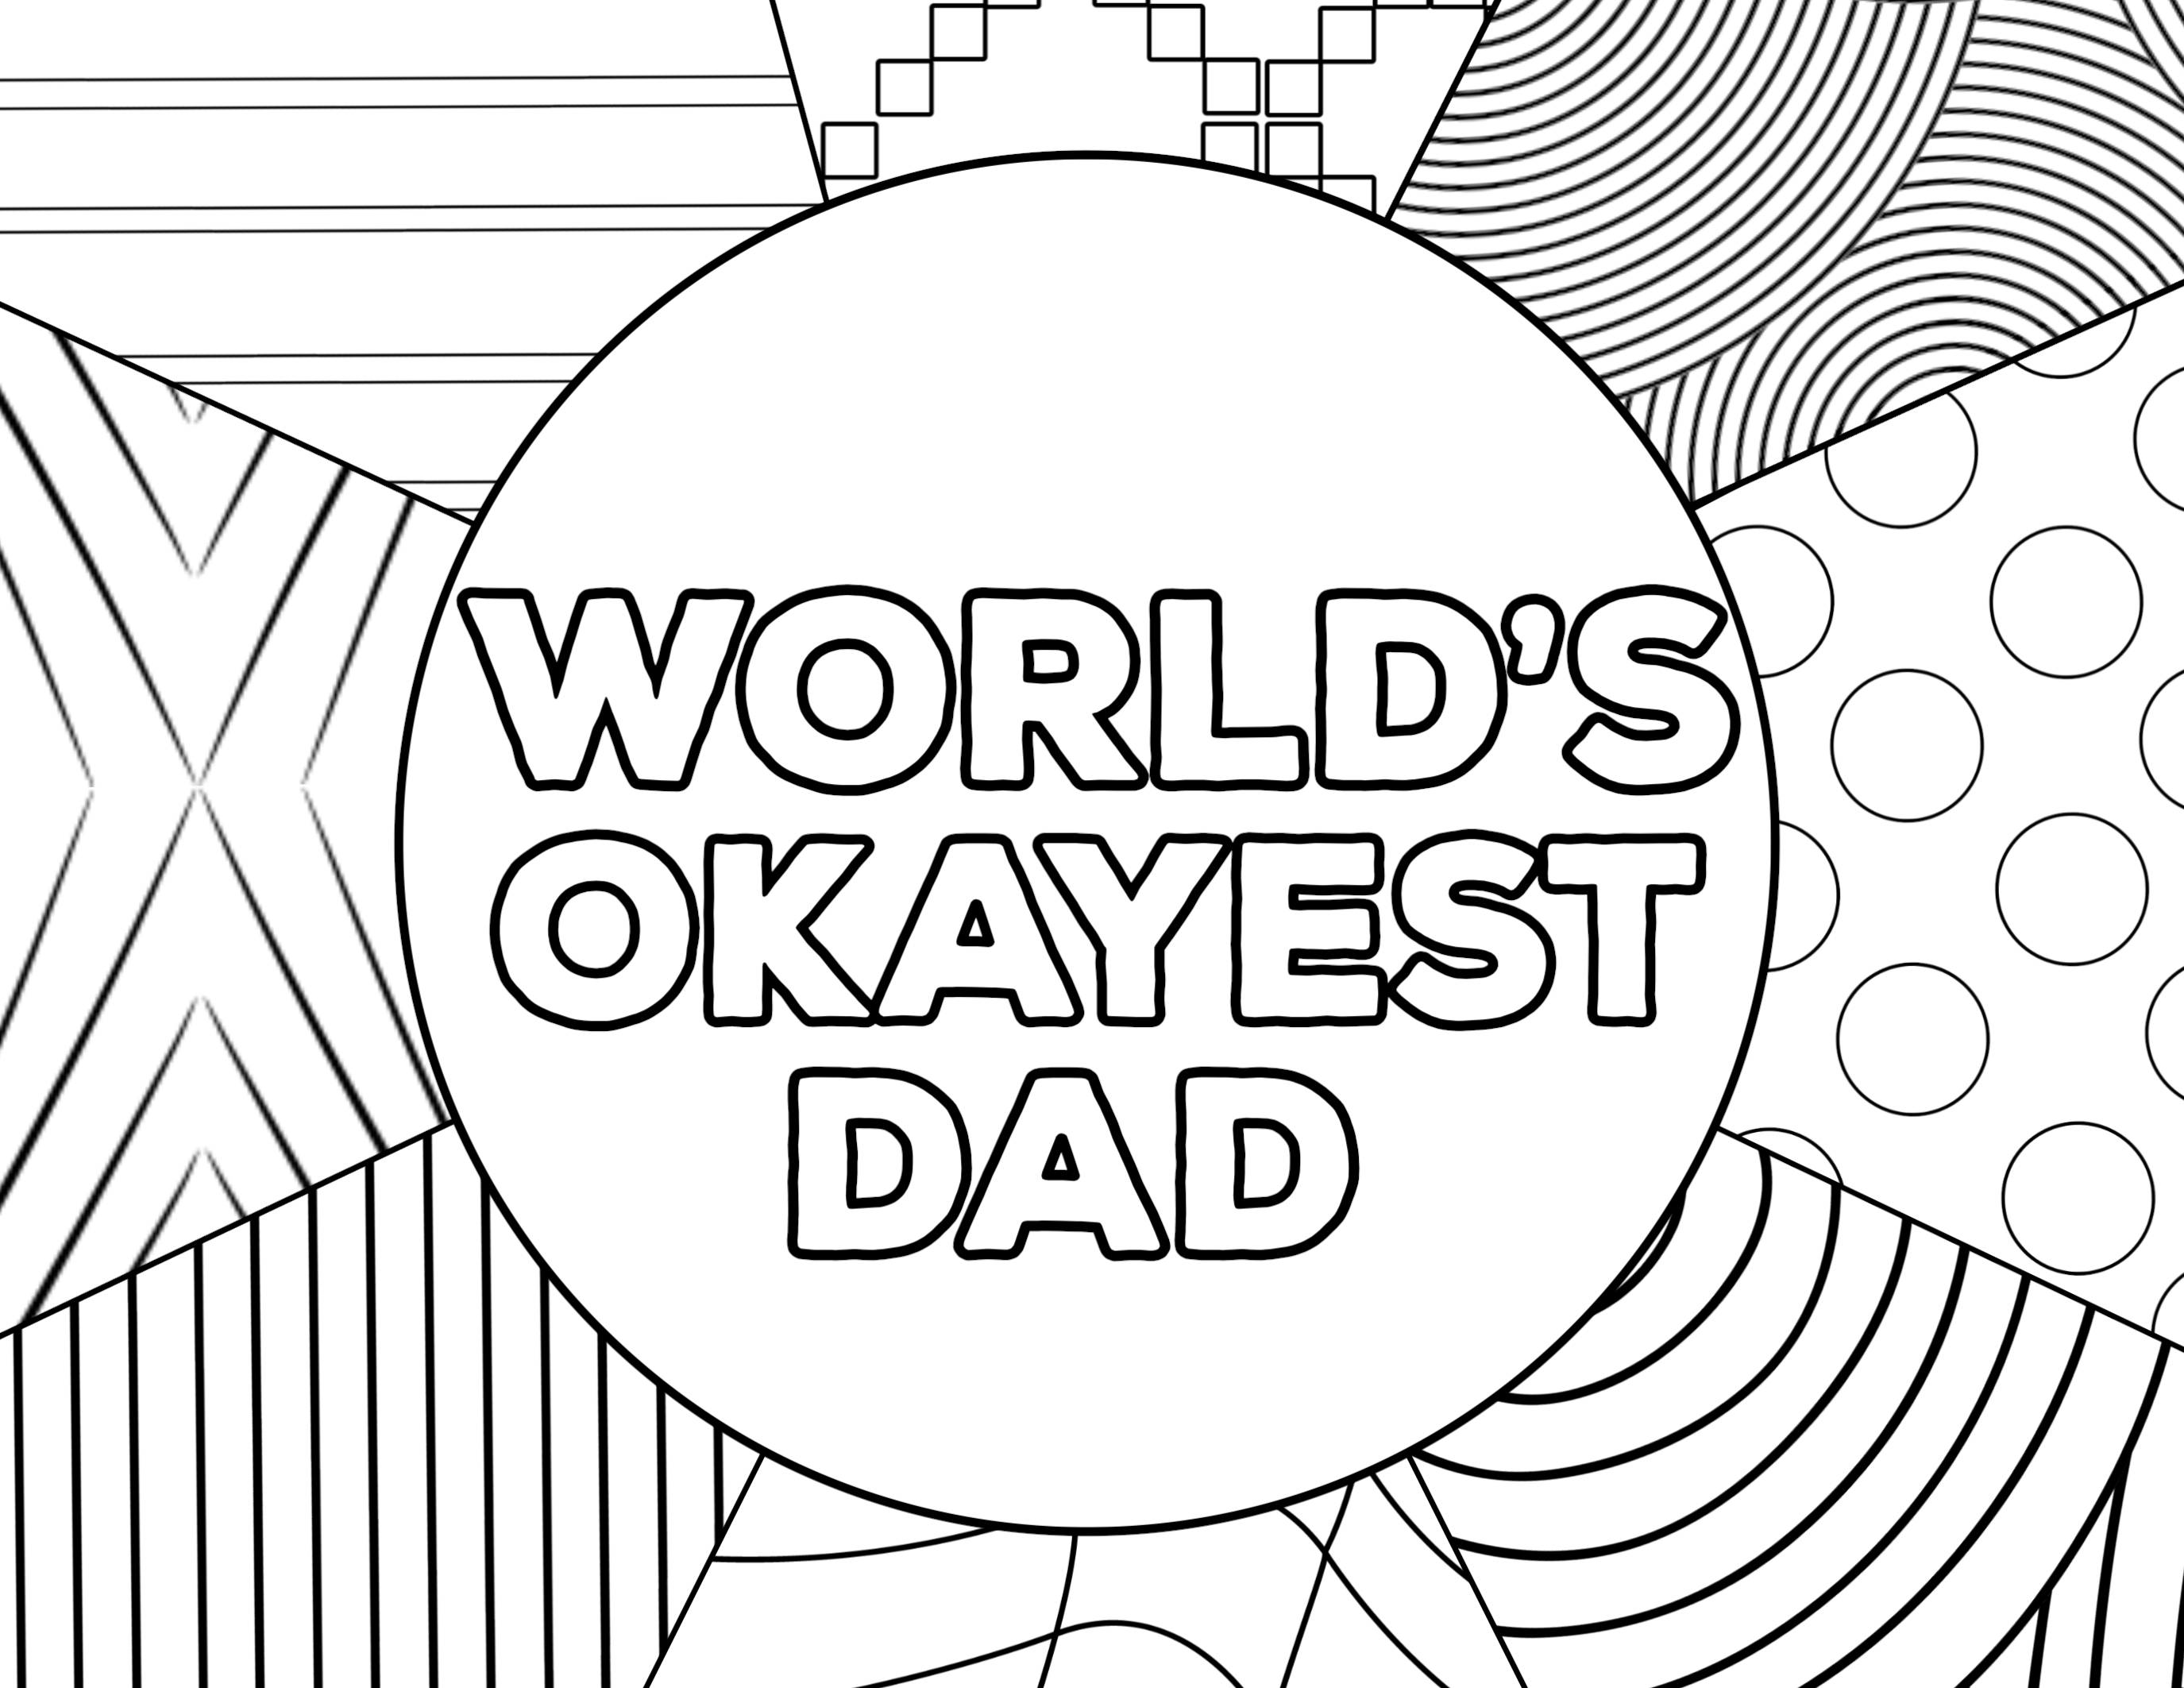 world-s-okayest-dad-father-s-day-card-printable-paper-trail-design